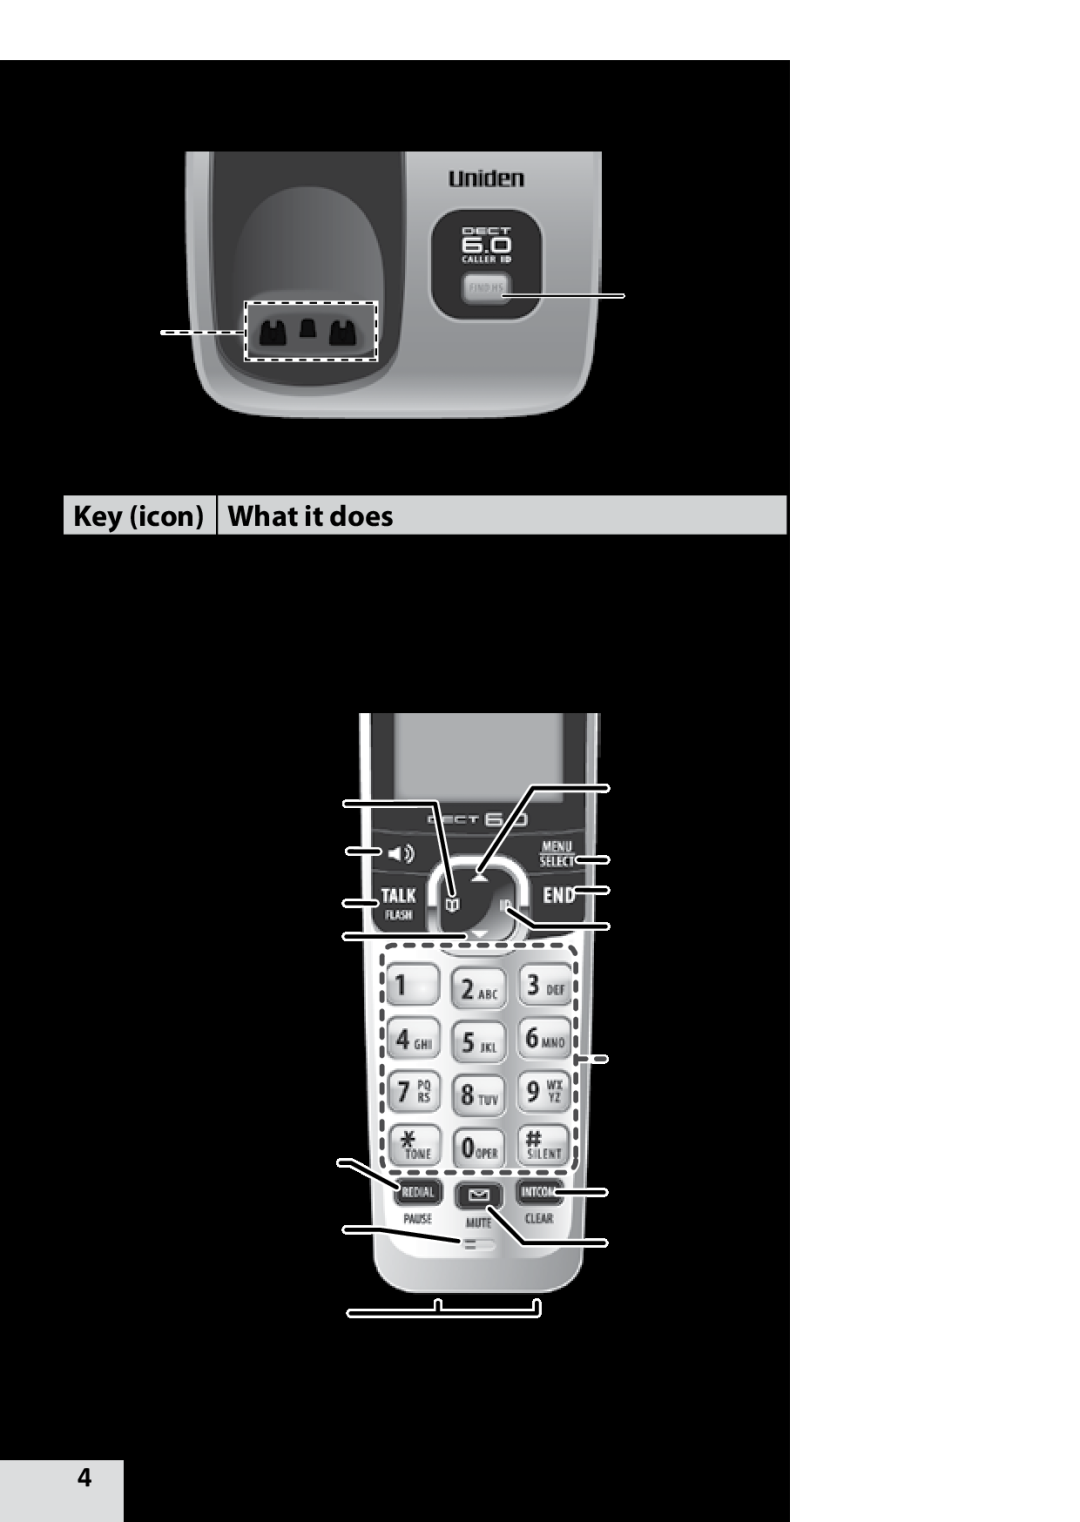 Uniden D1760-11 Getting to Know Your Phone, Parts of the Base, What it does, In standby page all handsets, Key icon, Down 